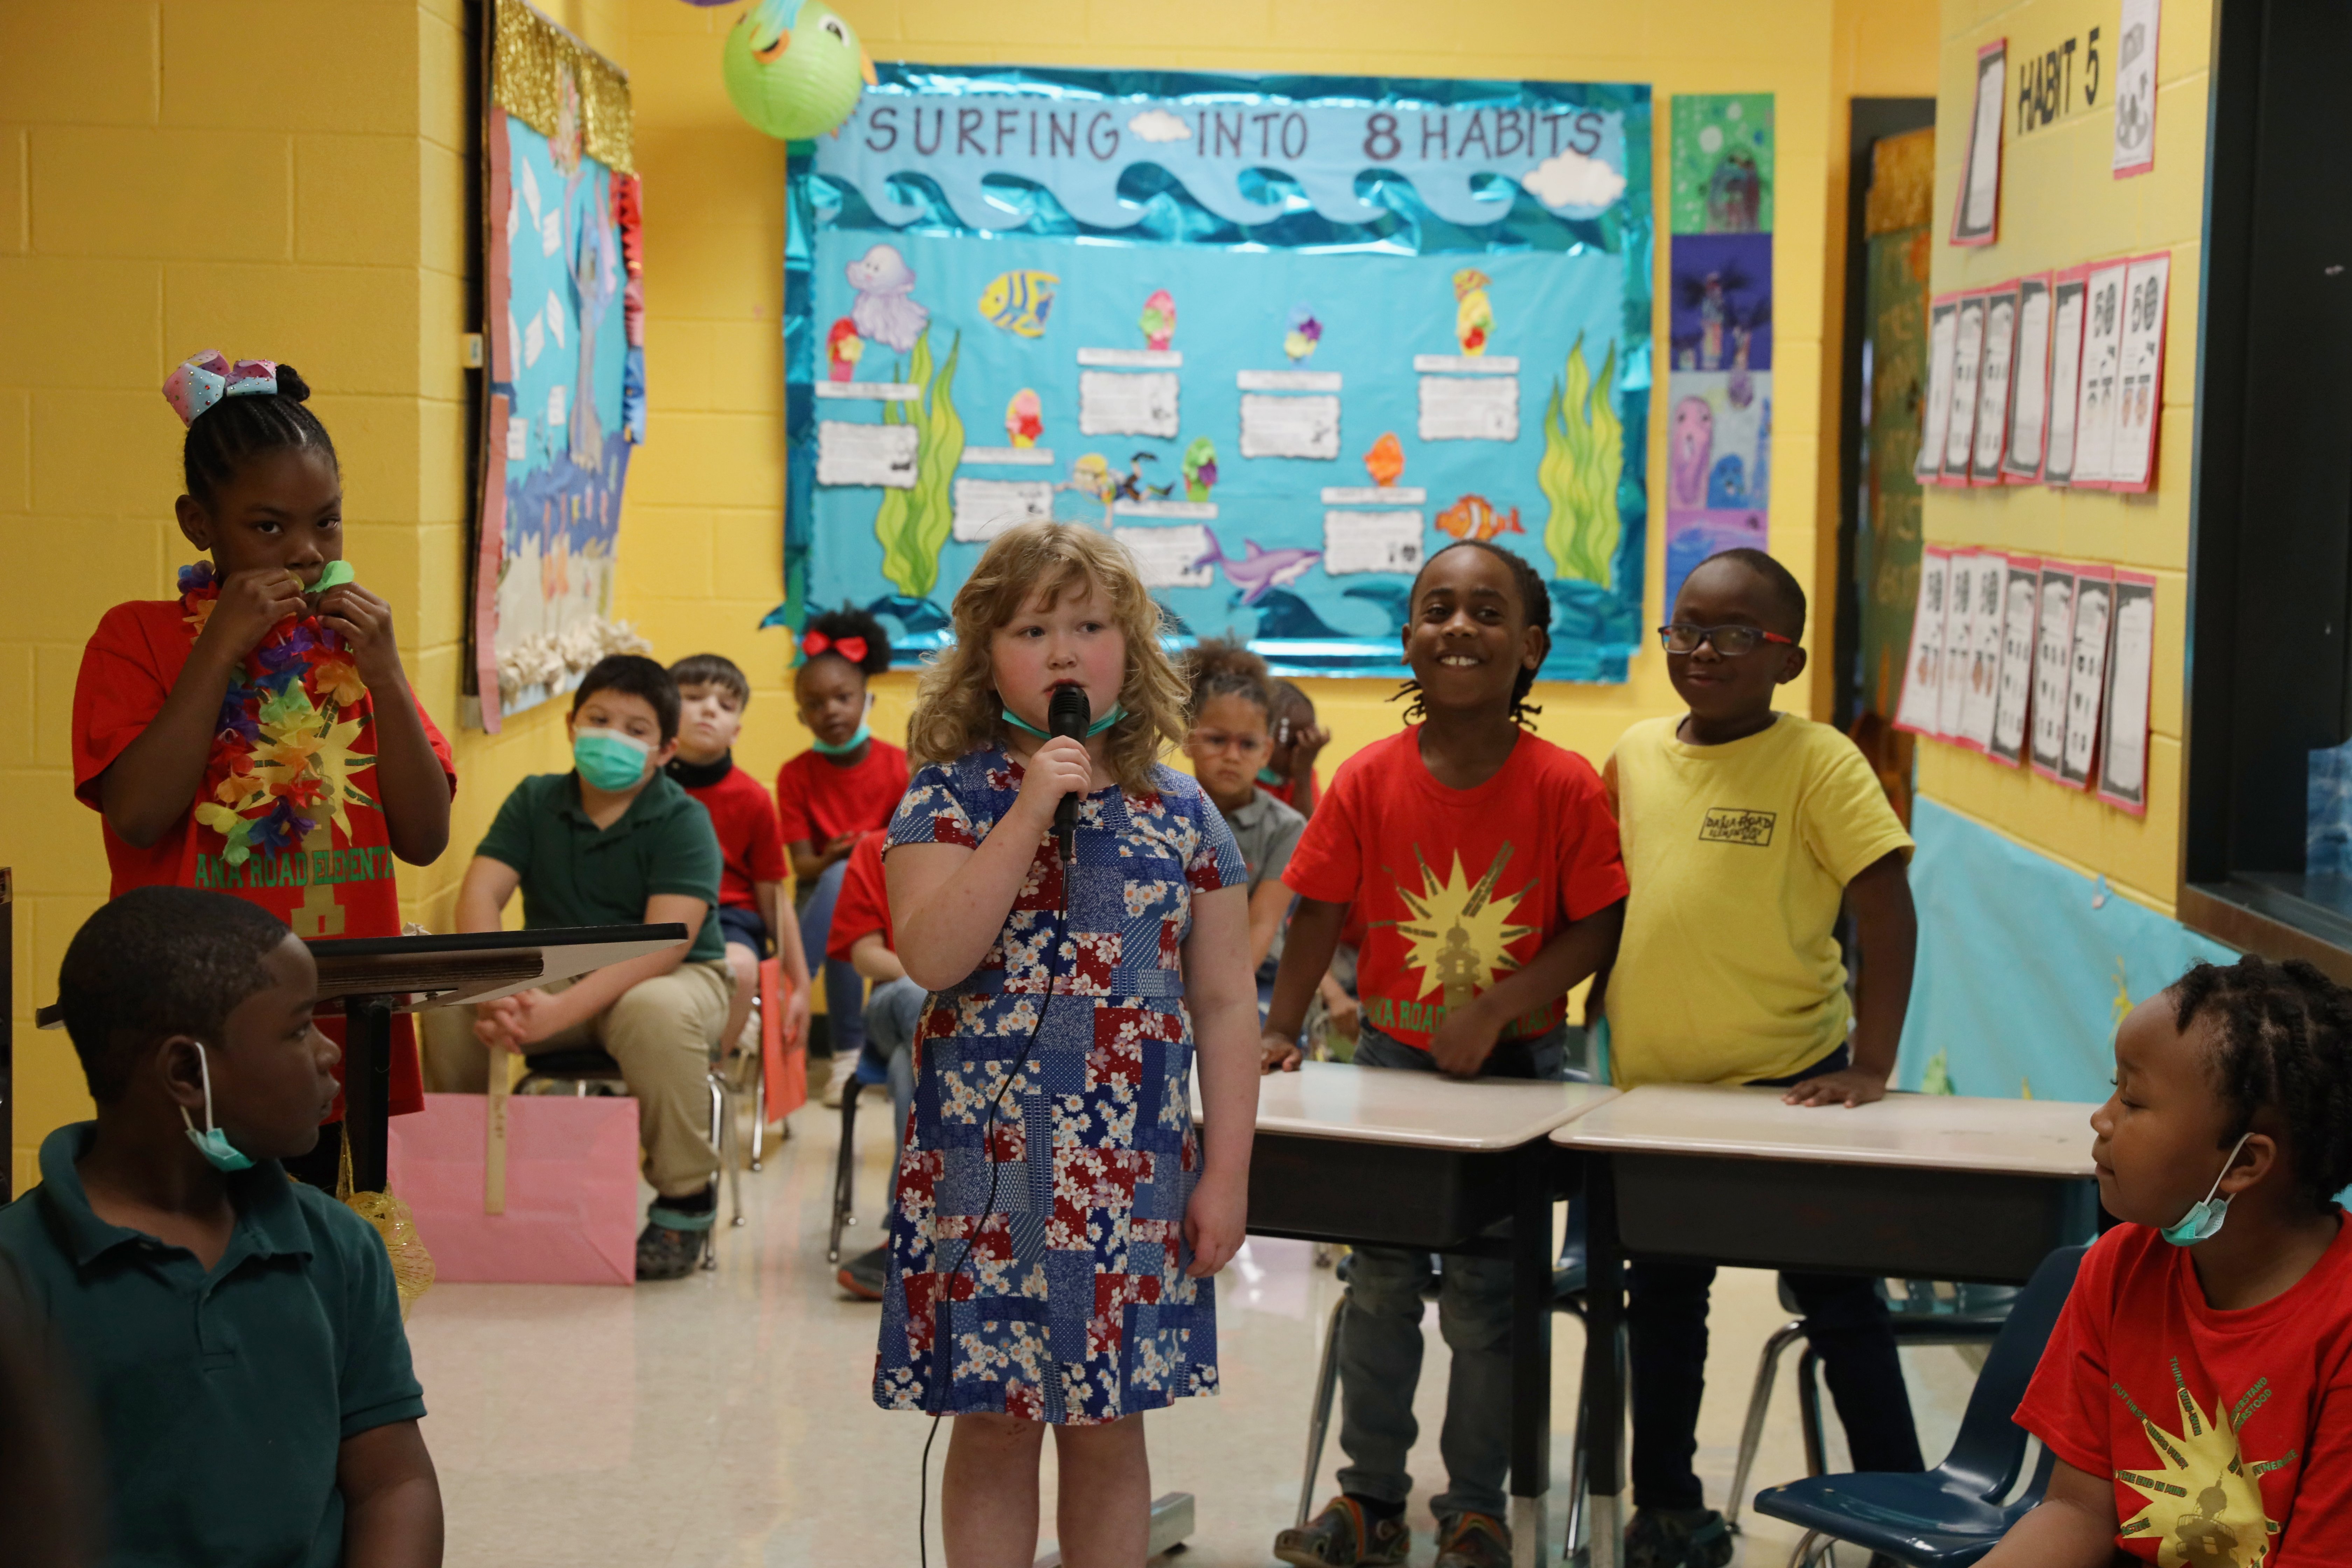 A class of Kindergarten students are performing a skit in a yellow hallway.